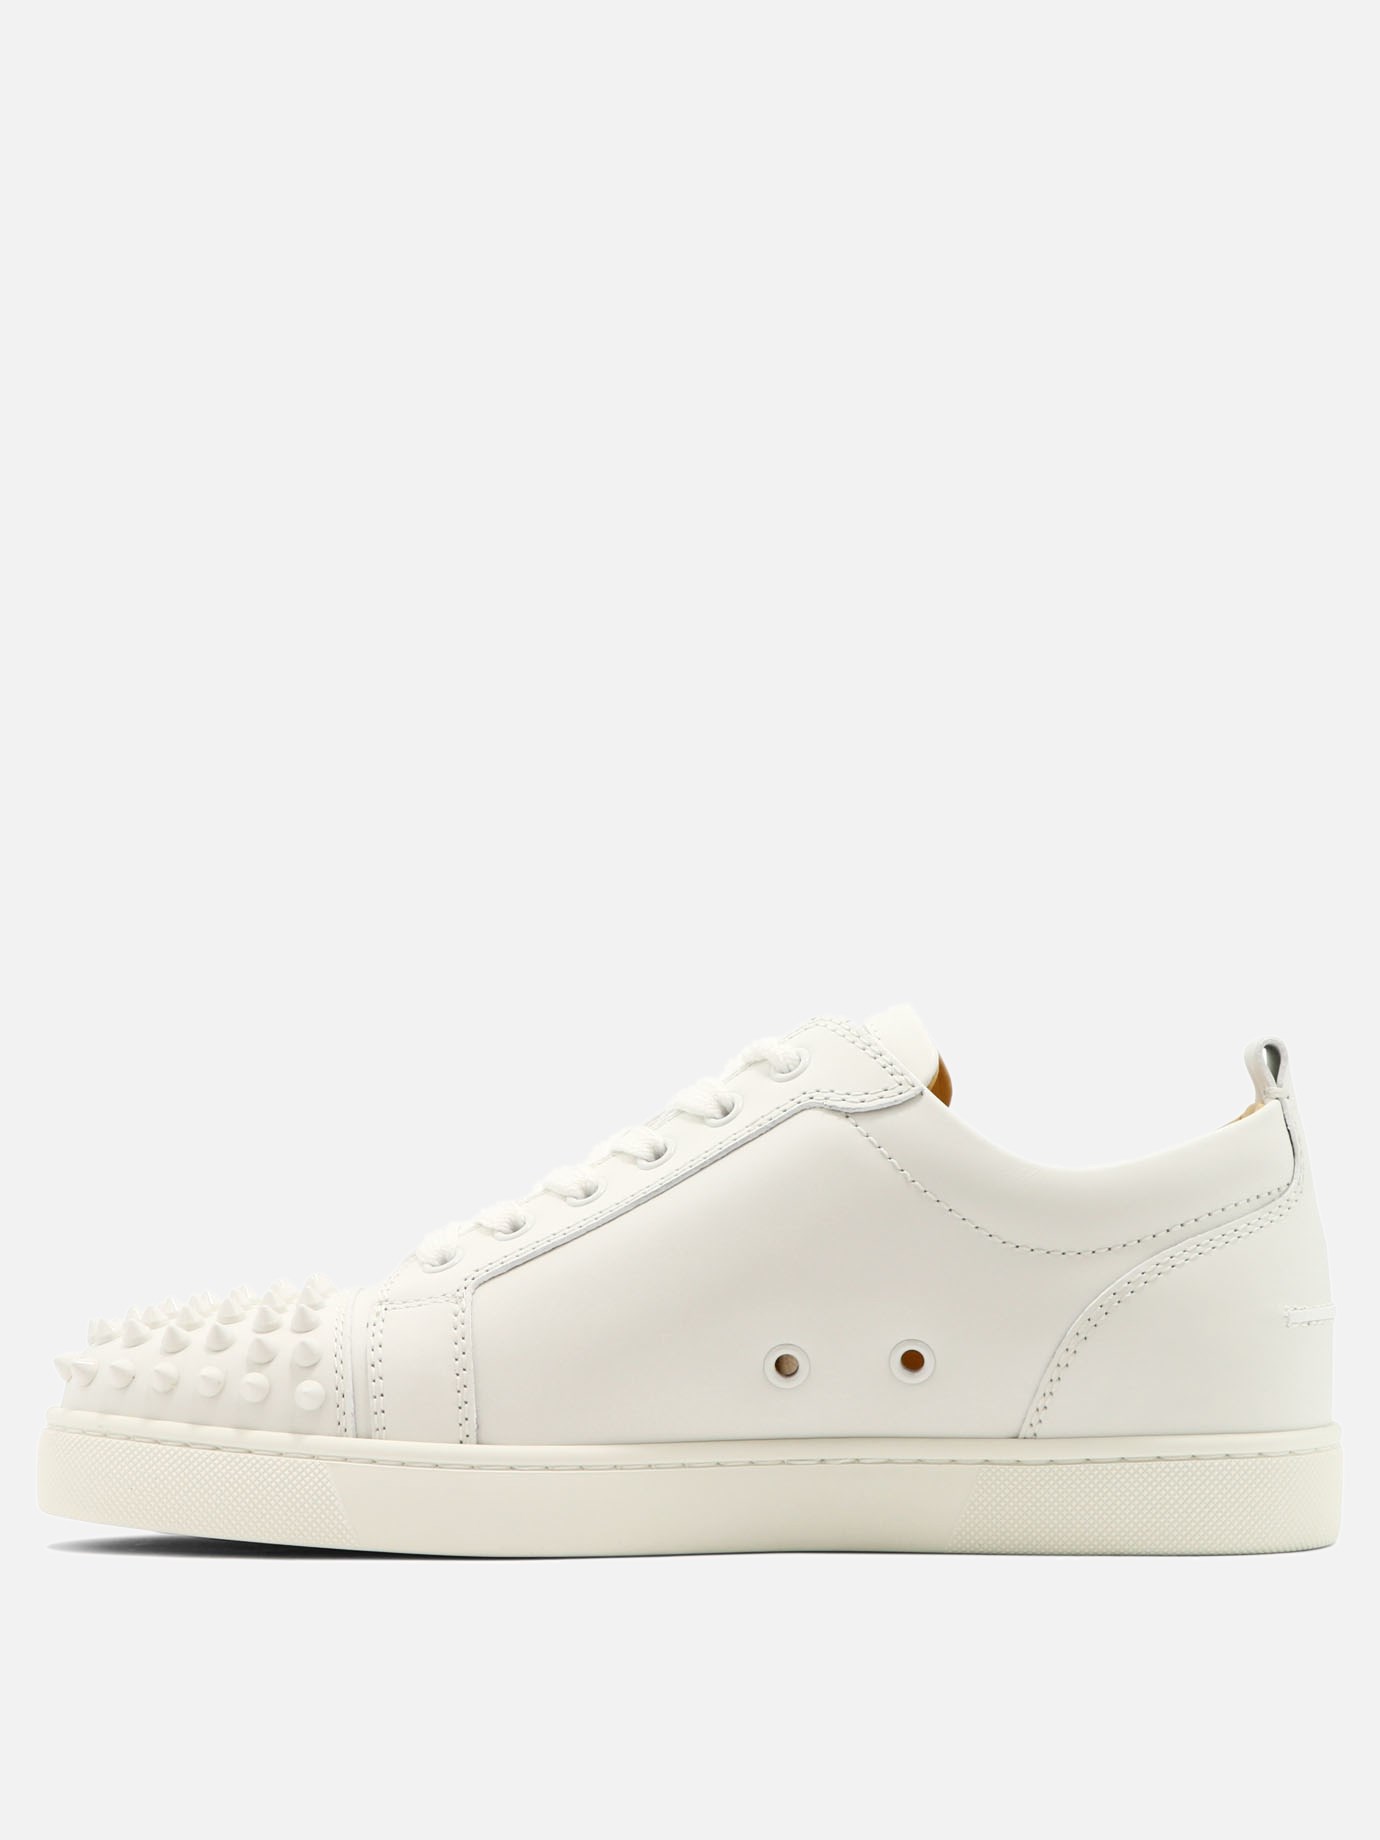 Sneaker  Louis Junior Spikes  by Christian Louboutin